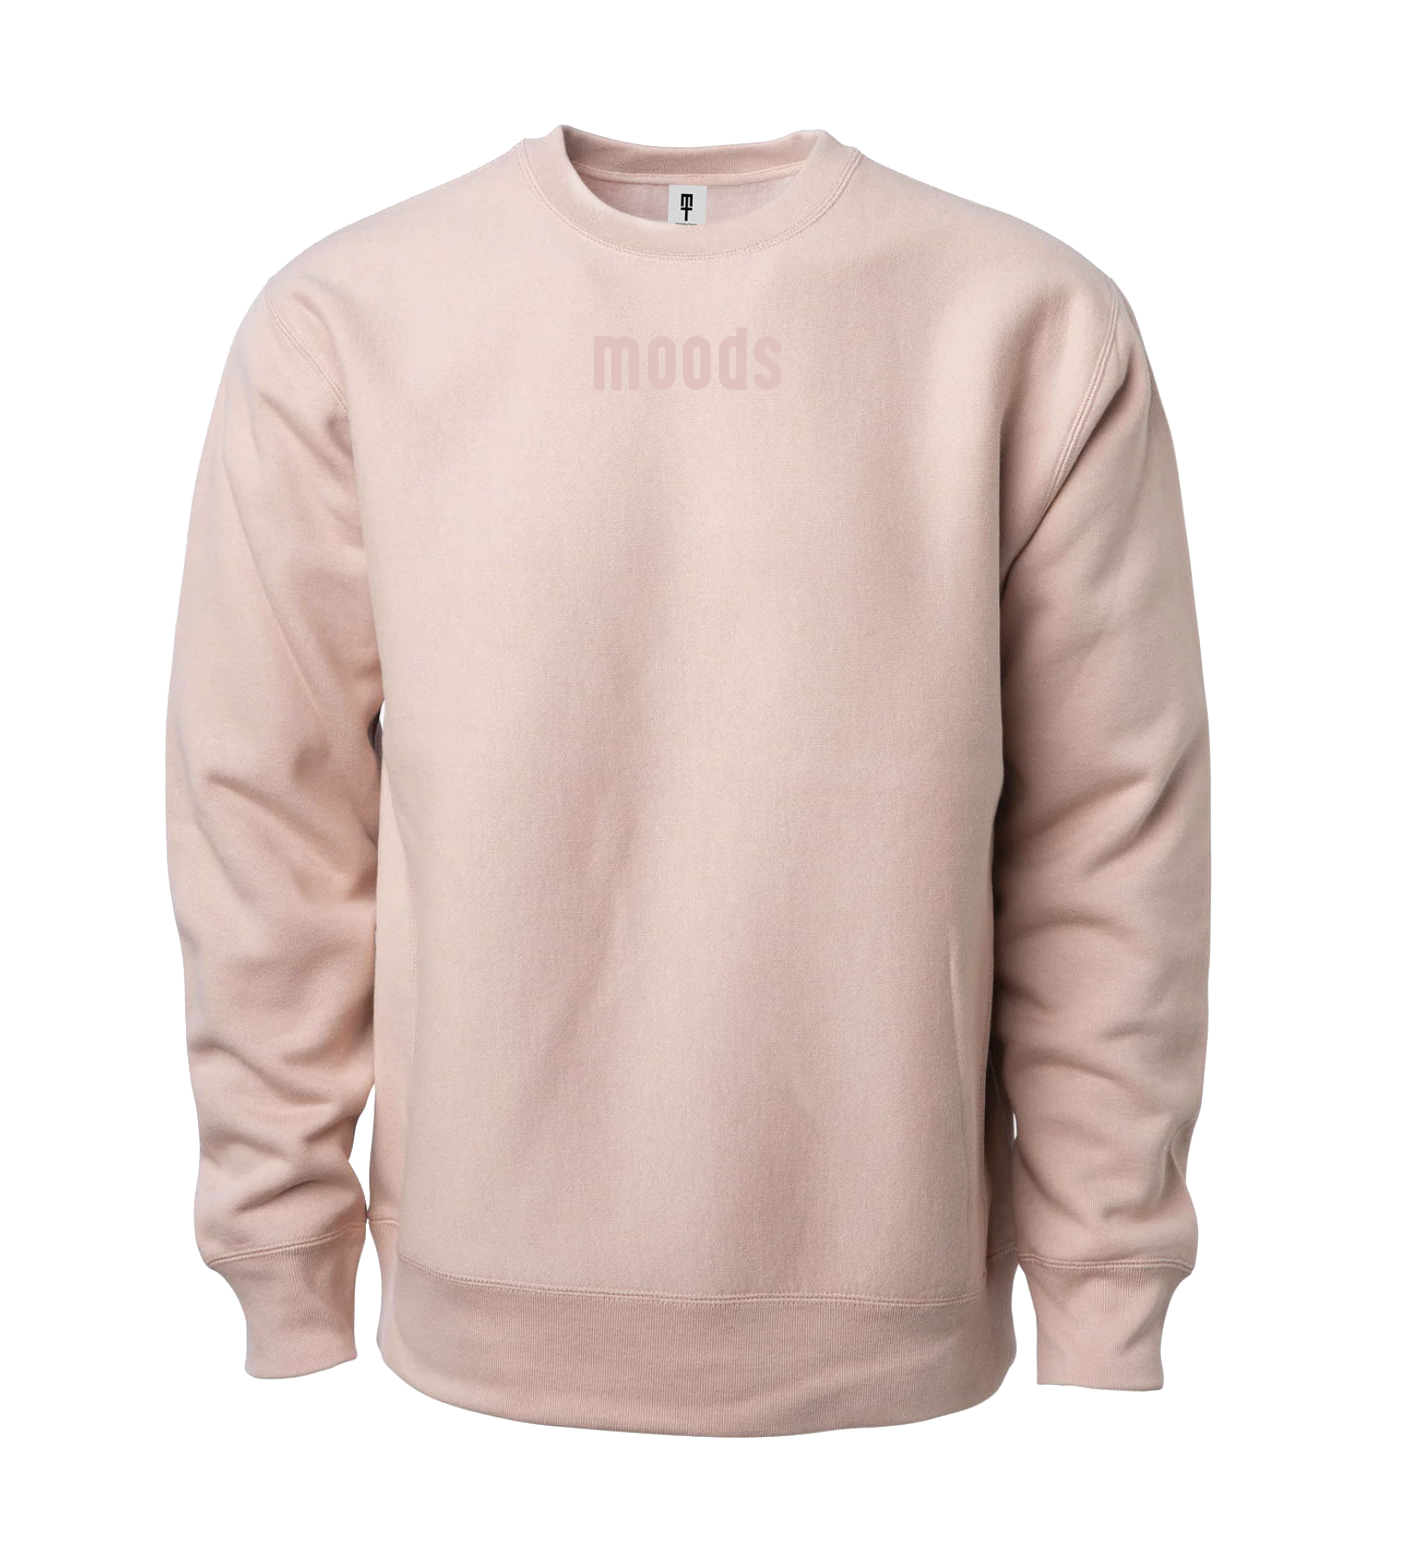 Moods Embroidered Crewneck (Dusty Pink)